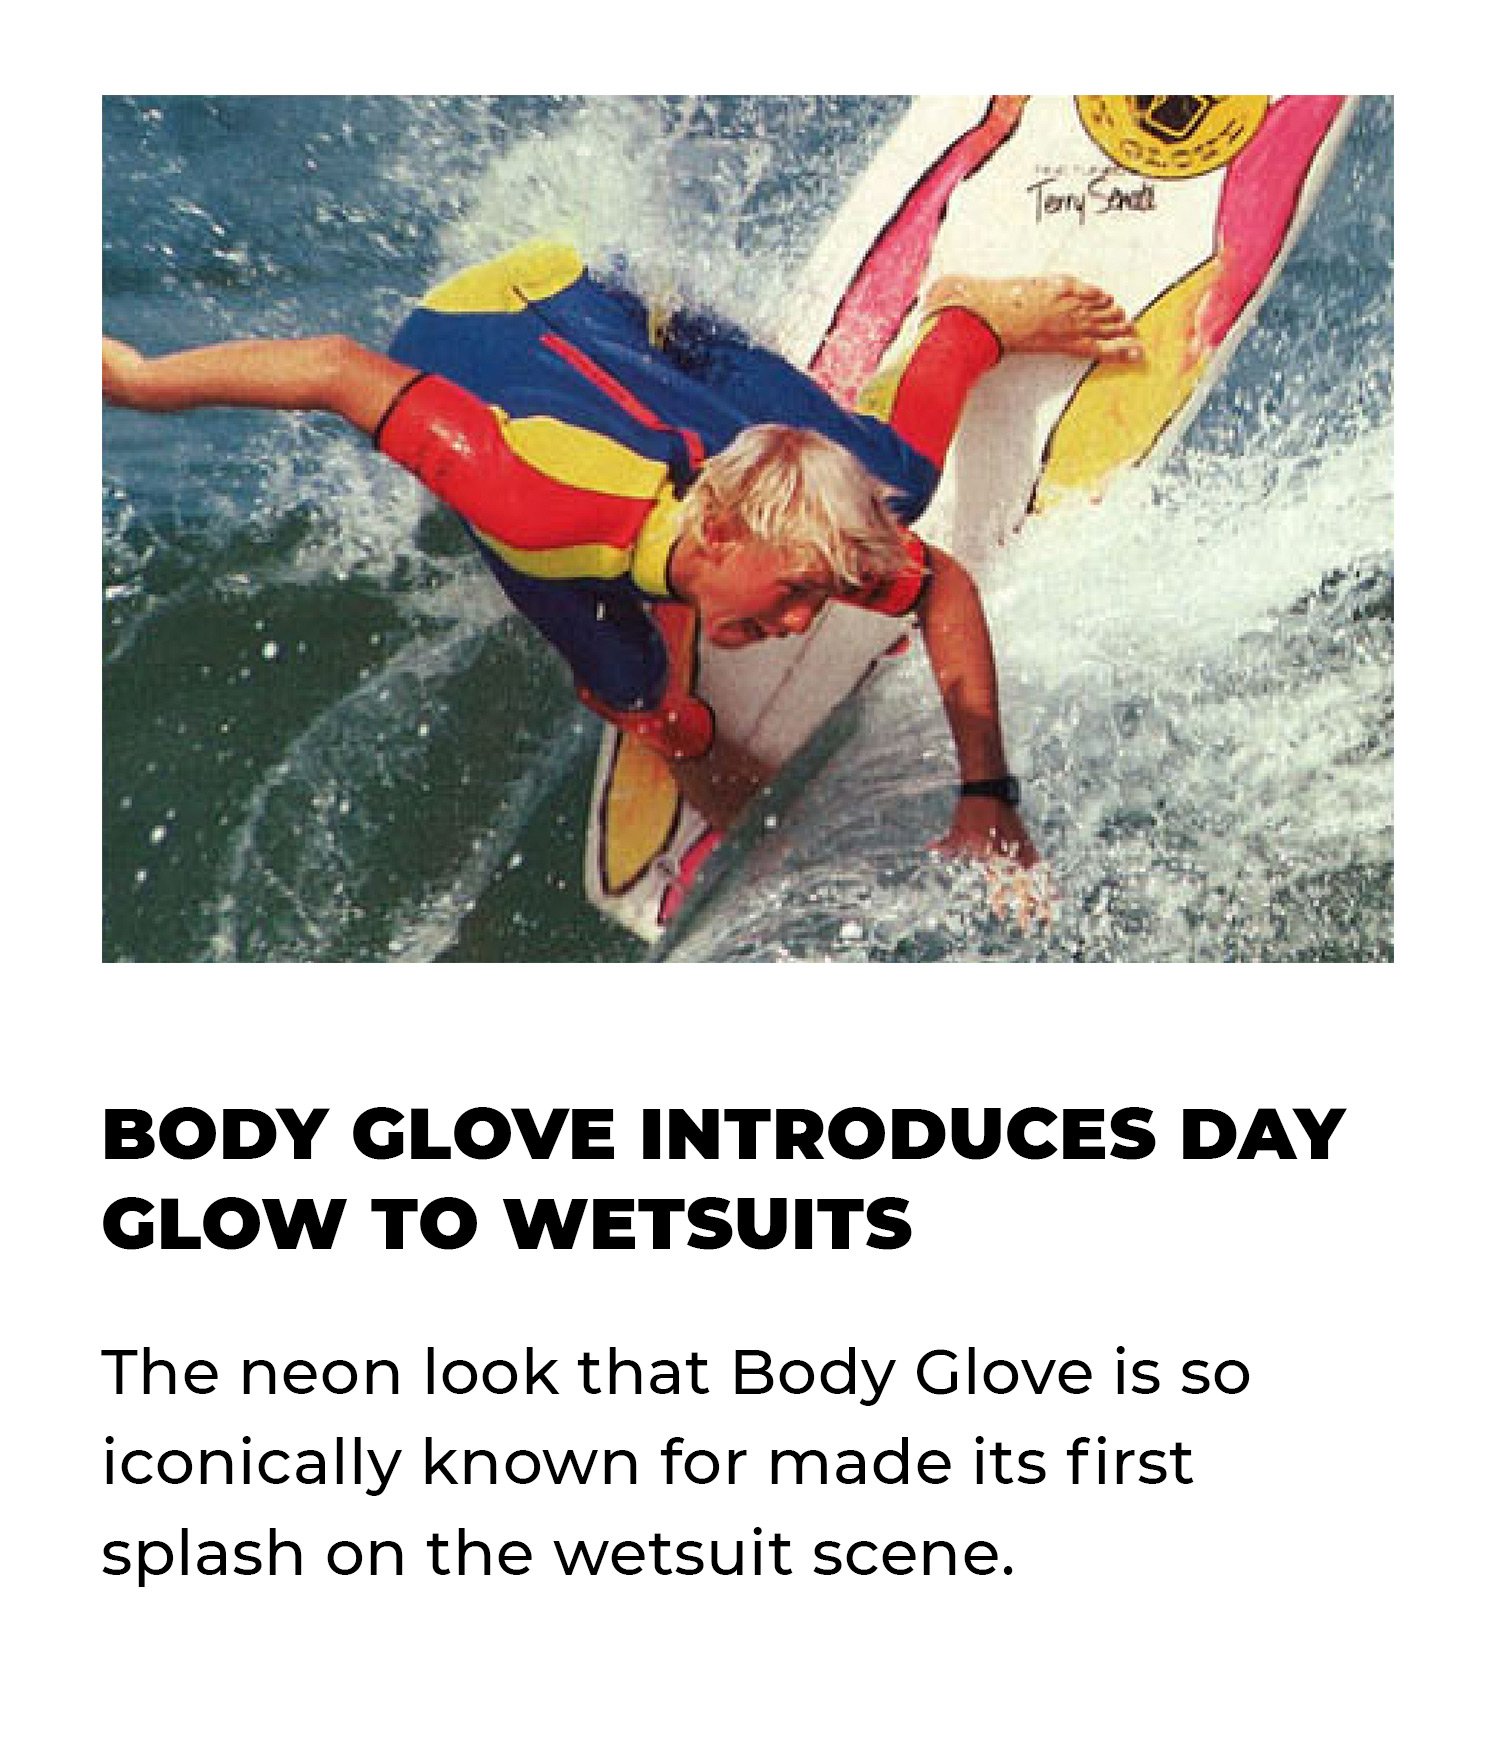 Body Glove Introduces Day Glow to Wetsuits | The neon look that Body Glove is so iconically known for made its first splash on the wetsuit scene.